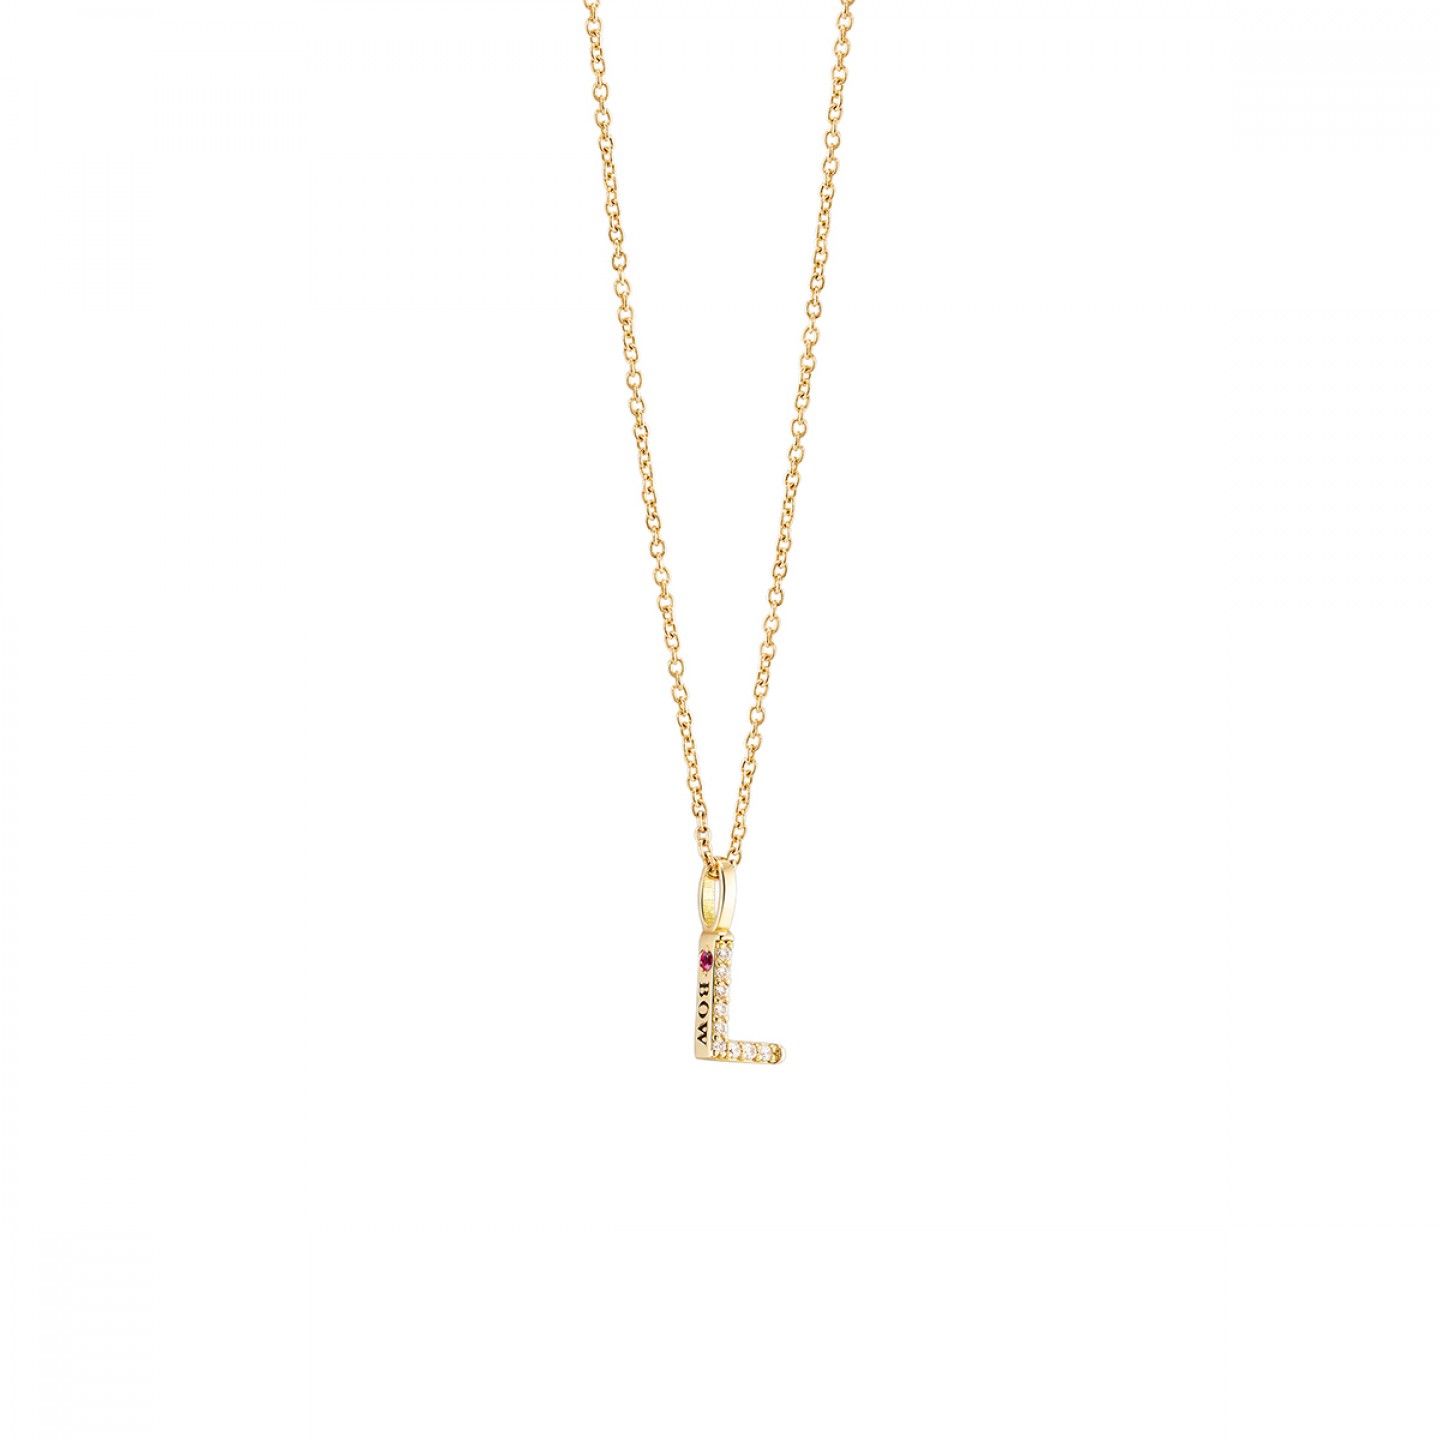 PENDENTE BOW GOLD - LETTER L